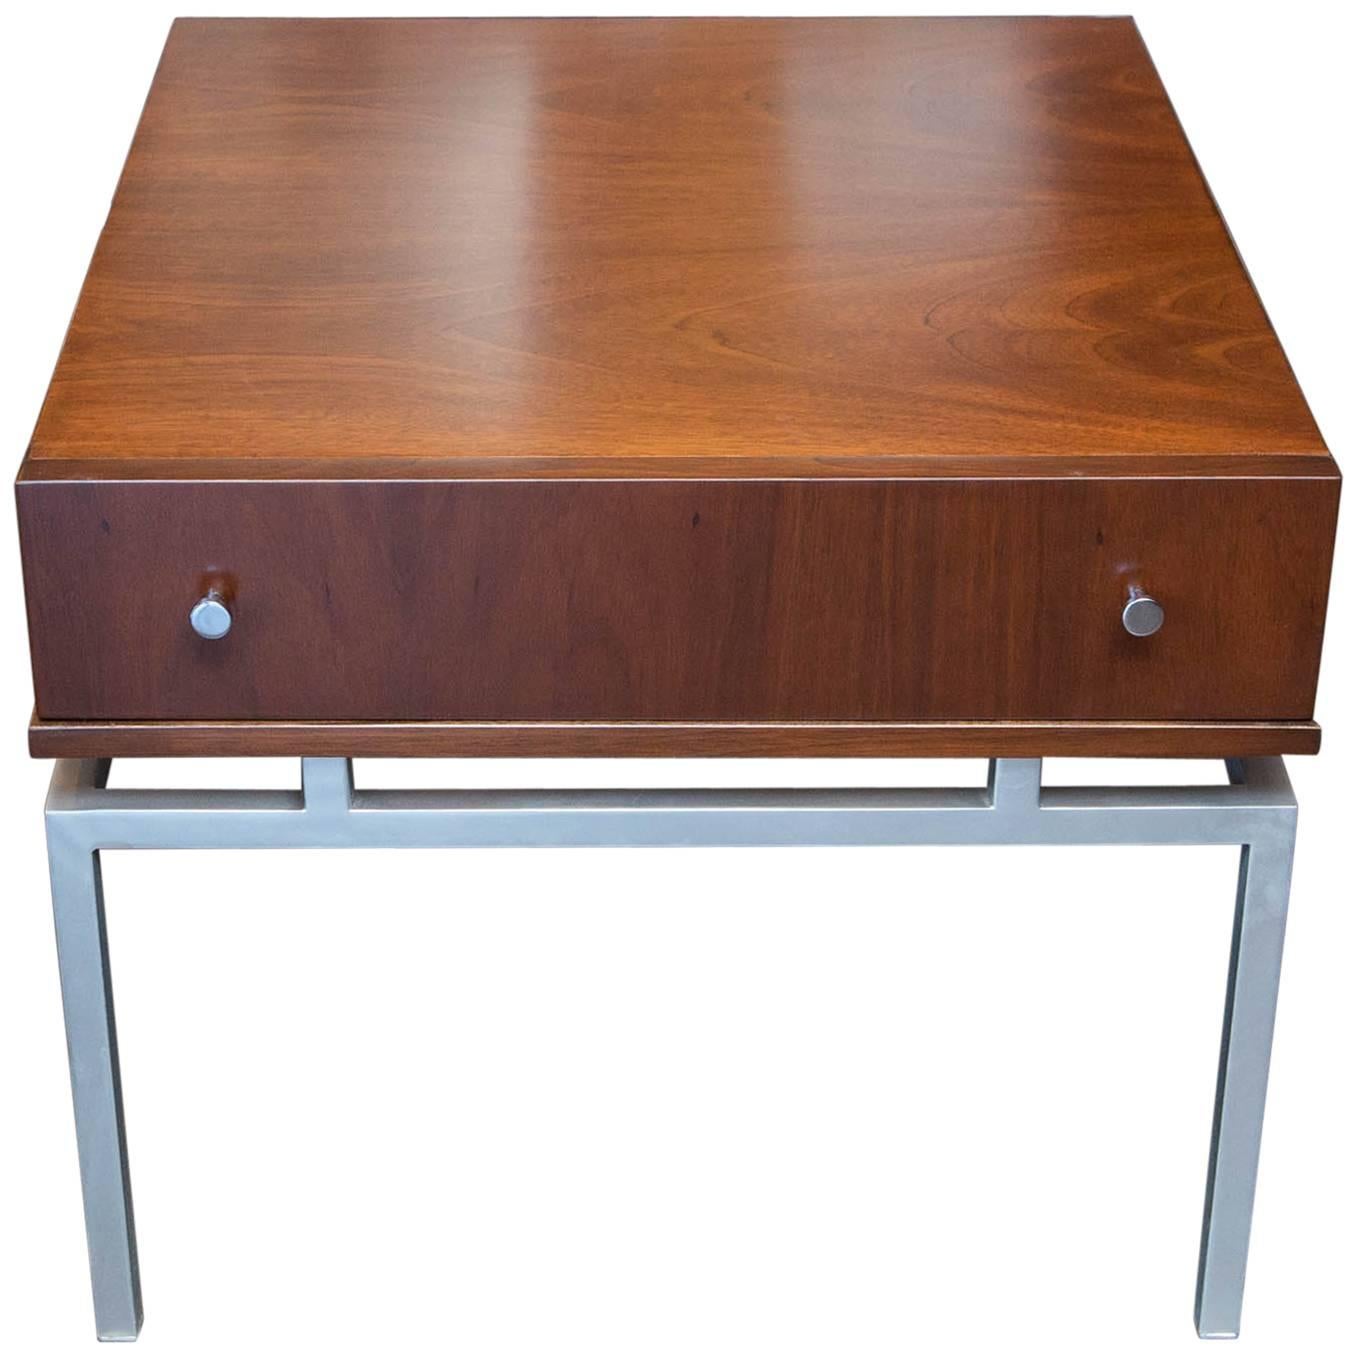 Single Drawer End Table by American of Martinsville